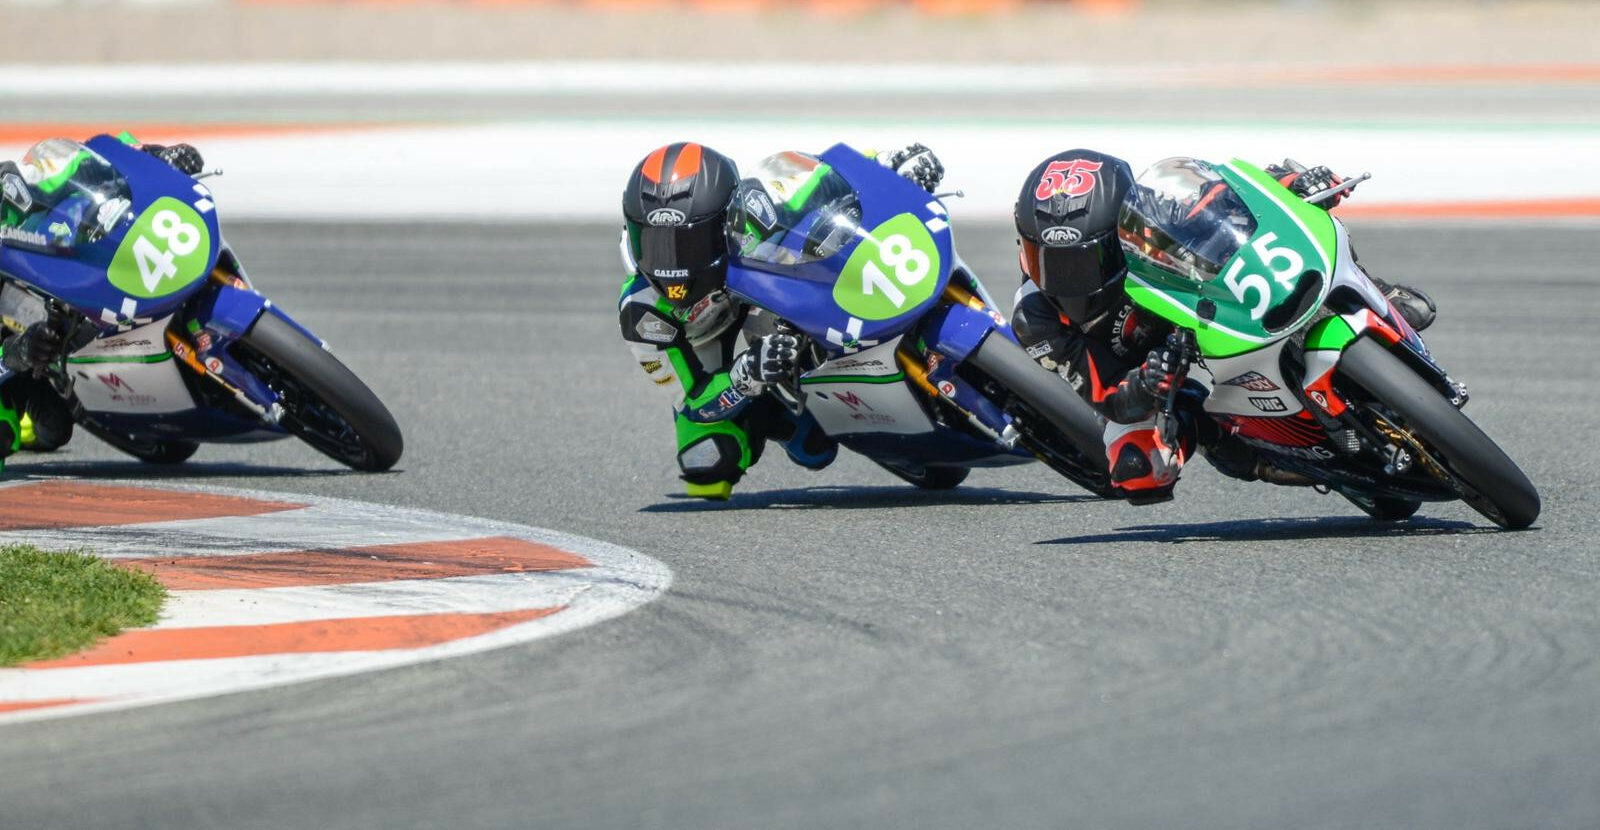 Mikey Lou Sanchez (55) leading two other riders during a RFME ESBK Moto4 race in Valencia, Spain. Photo courtesy Sanchez Racing.